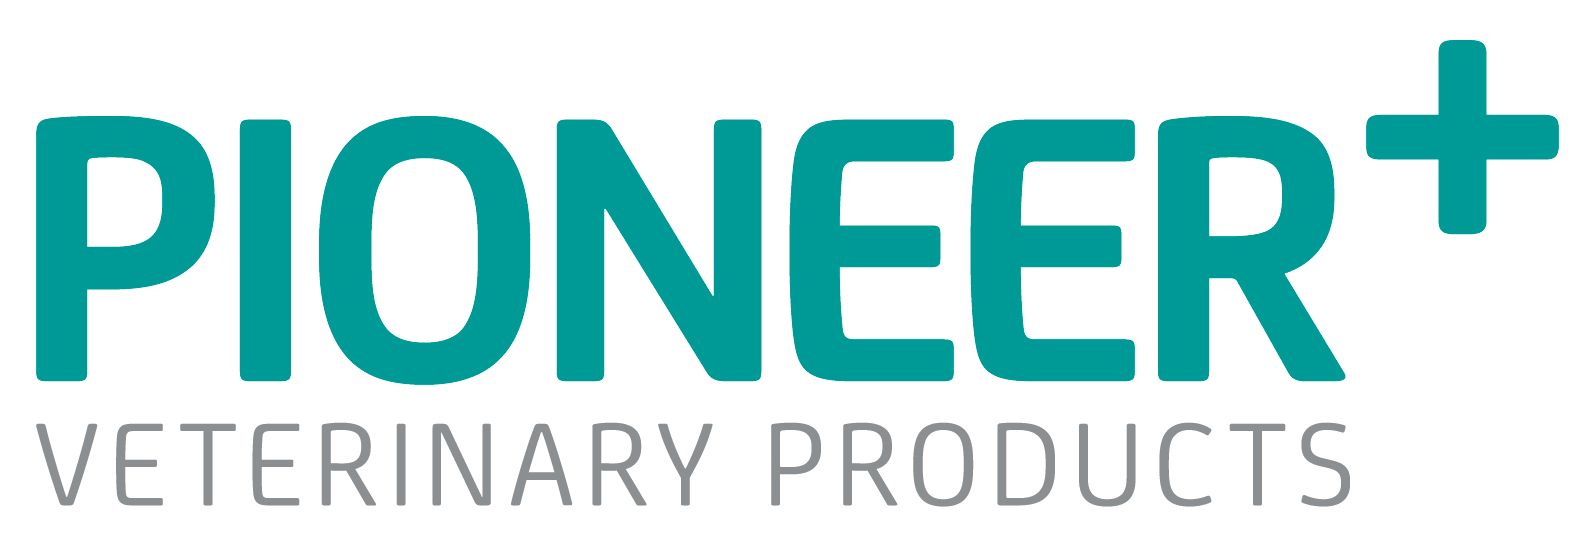 Pioneer Veterinary Products